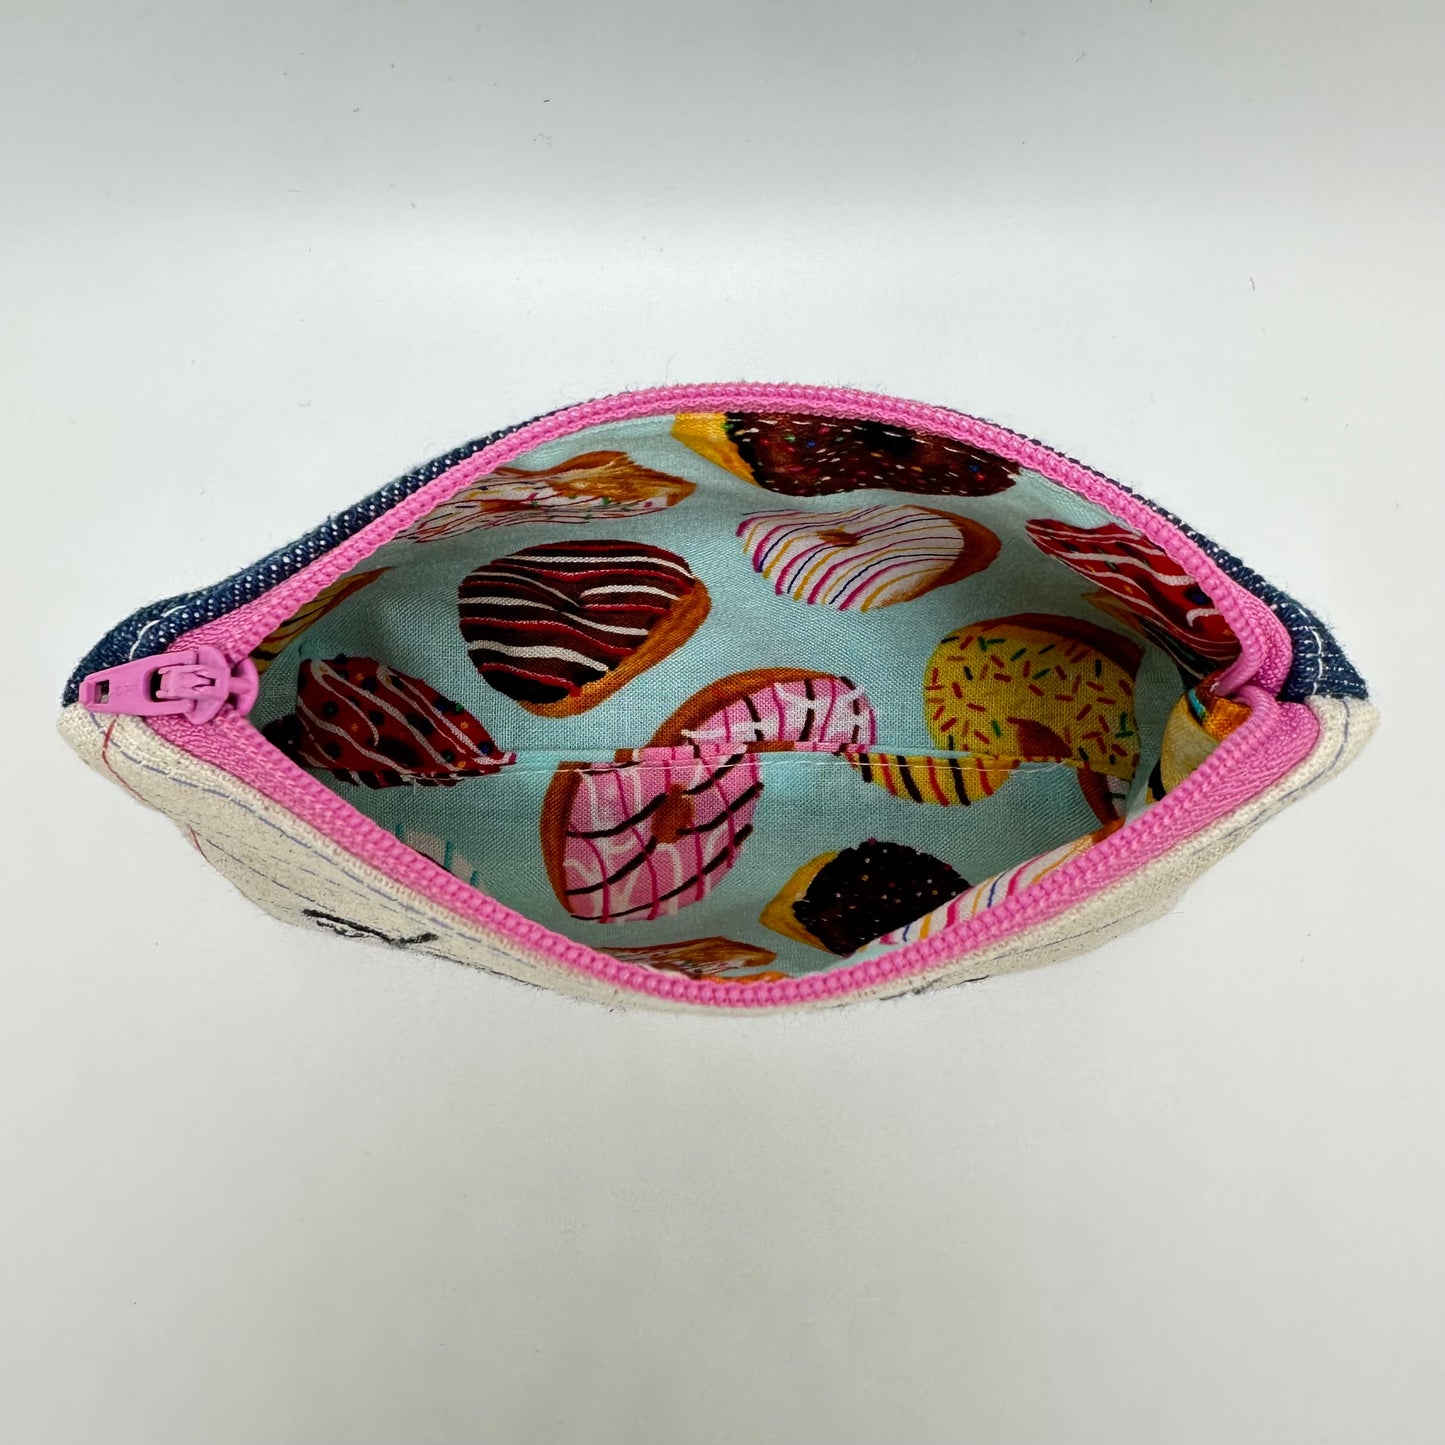 Inside of pouch showing fabric that has an assorted donut pattern.